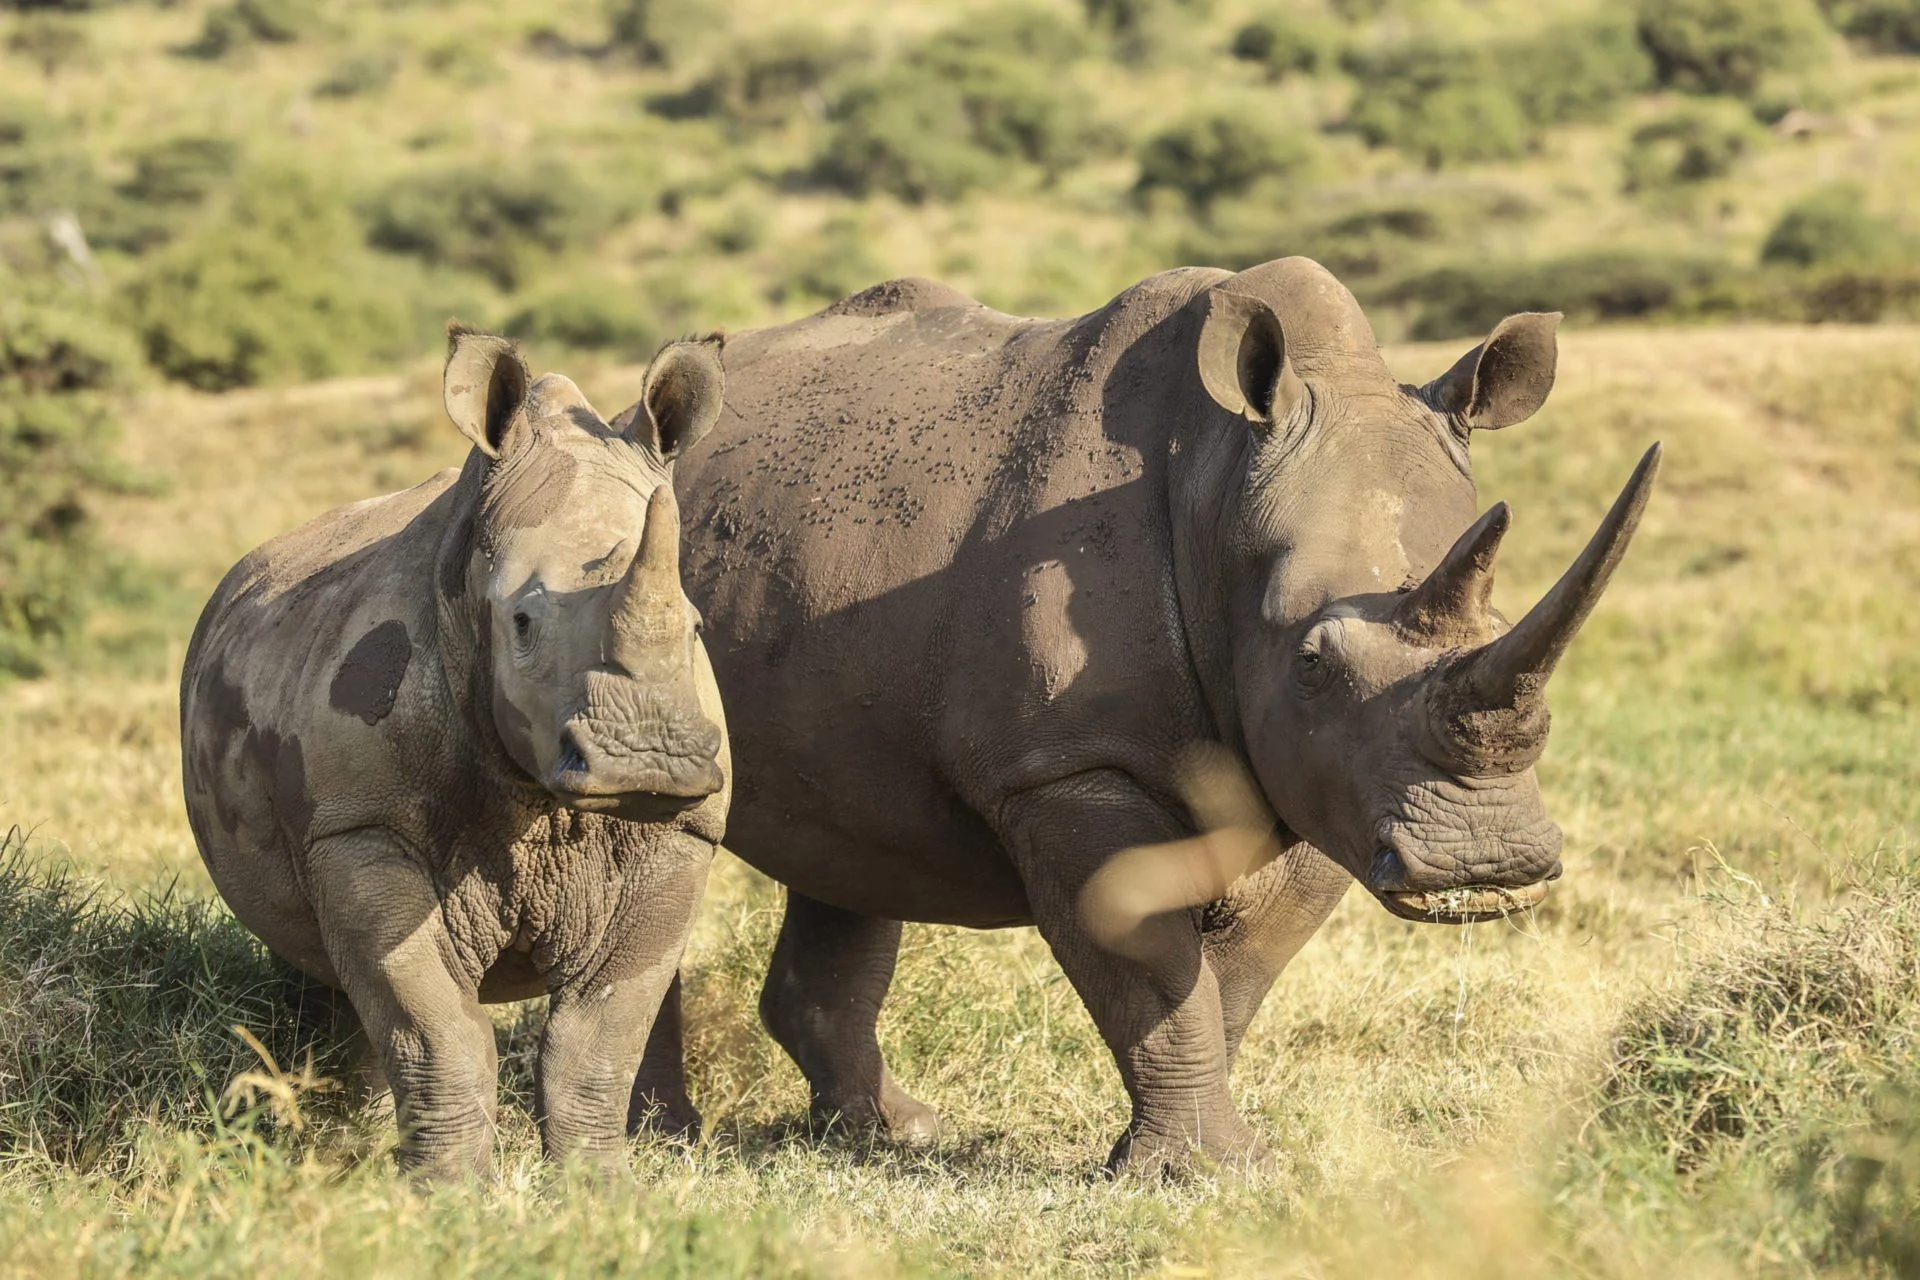 a rhinoceros with its calf standing in a grassy field